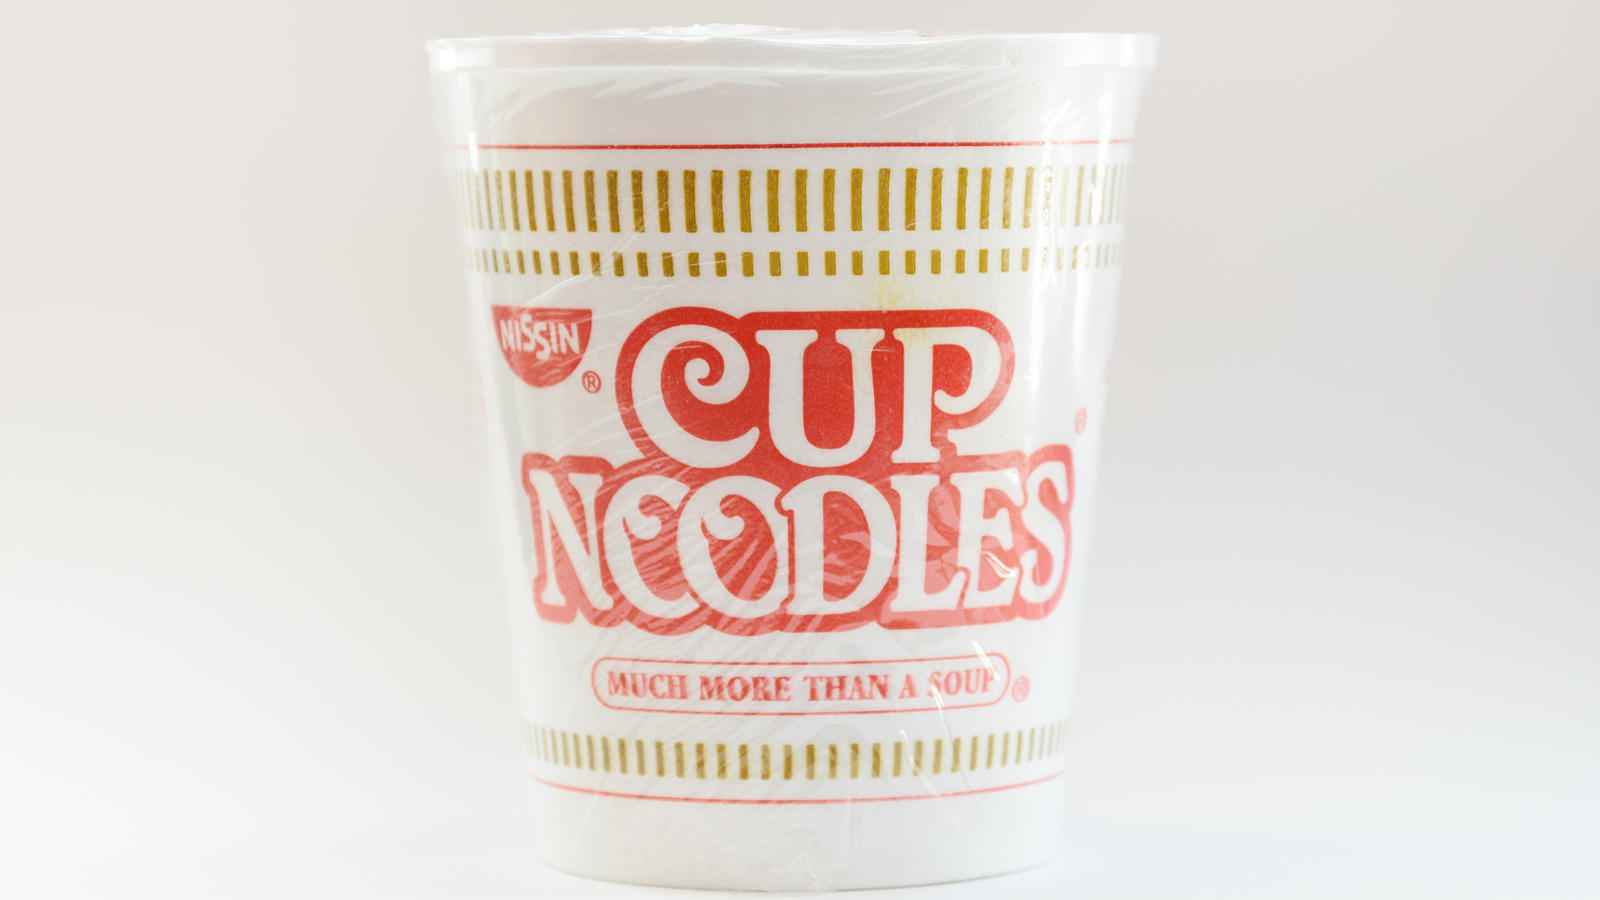 Nissin Cup Noodle Measuring Cup Release Info